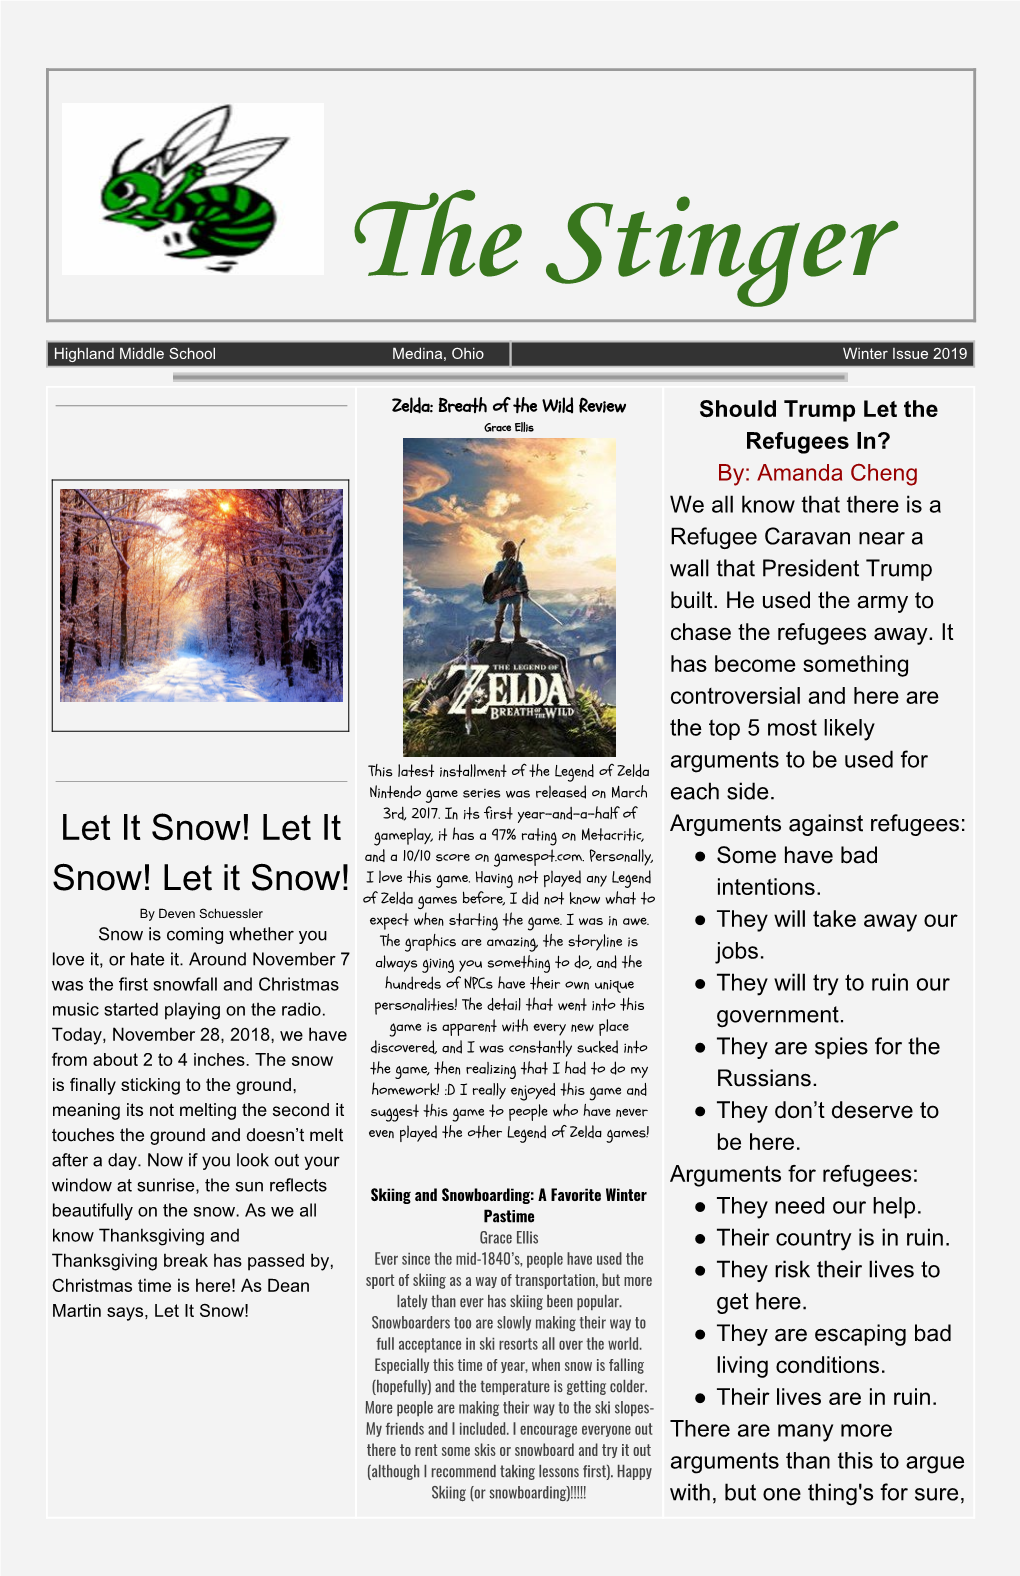 Let It Snow! Let It Gameplay, It Has a 97% Rating on Metacritic, and a 10/10 Score on Gamespot.Com